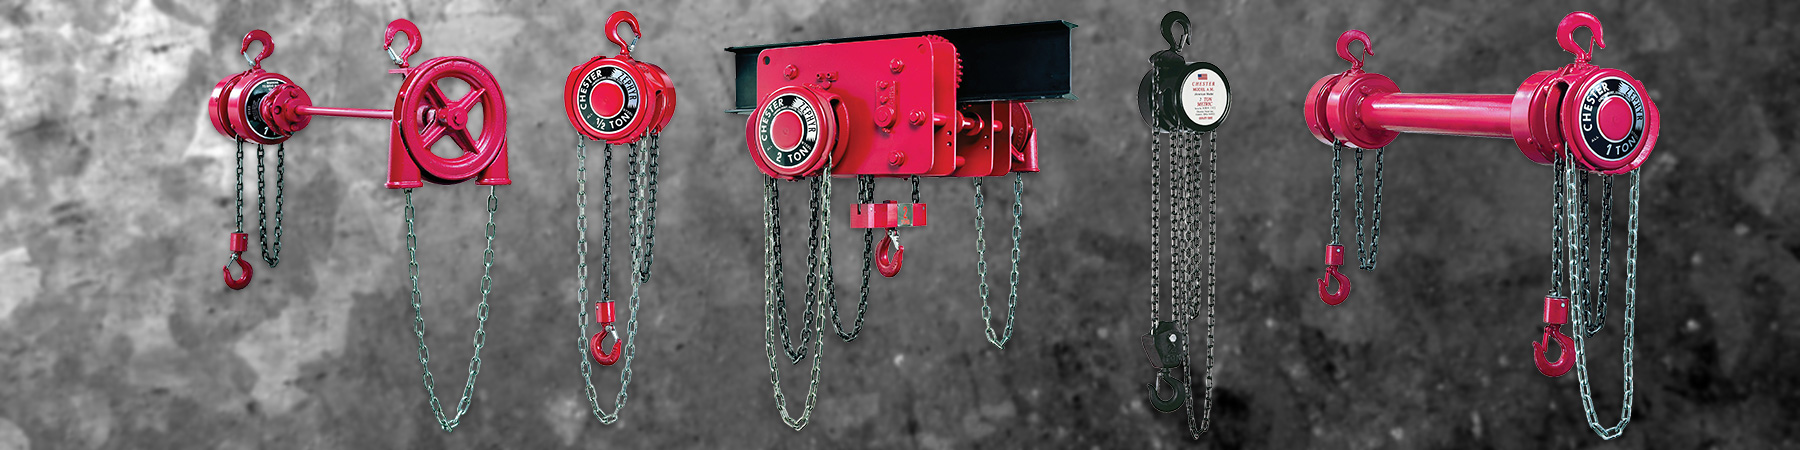 Chester Manual Chain Hoists